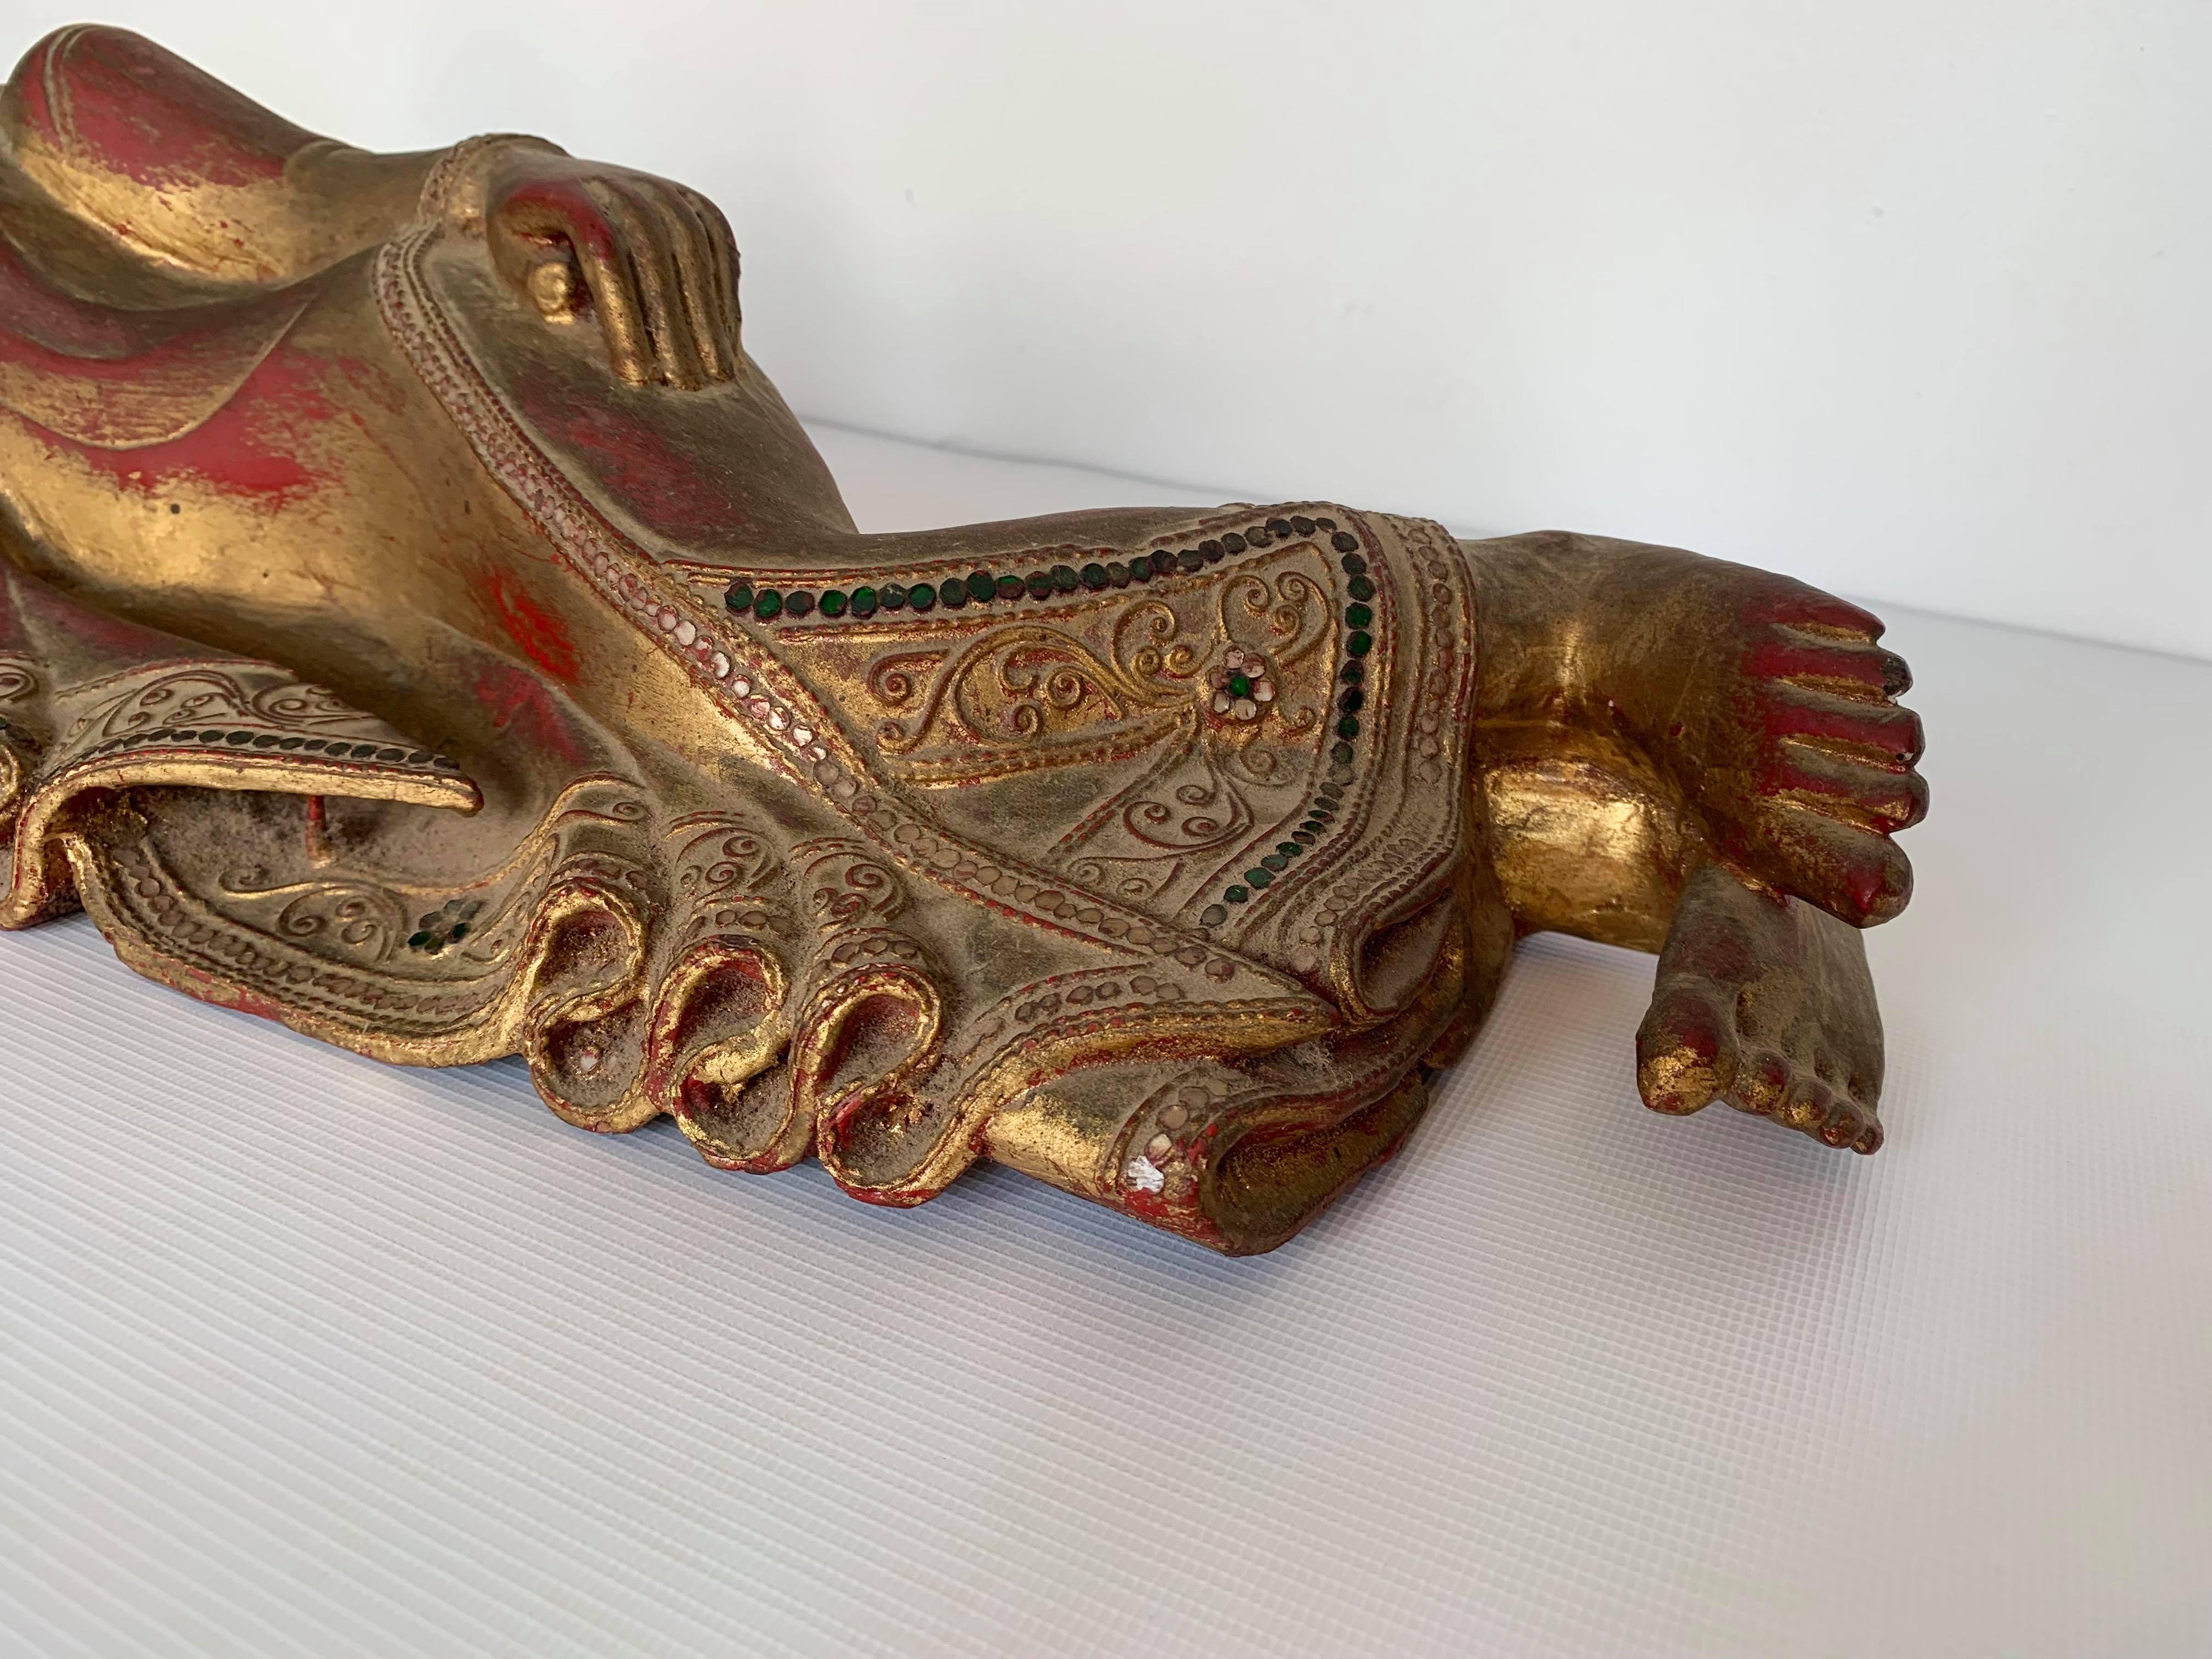 This is a mid-century reclining Buddha from Southeast Asia, most likely originating in Cambodia. It is carved from wood, gilded and painted, and ornamented with clear and green embellishments. It has gracious lines, appropriate for displaying on a